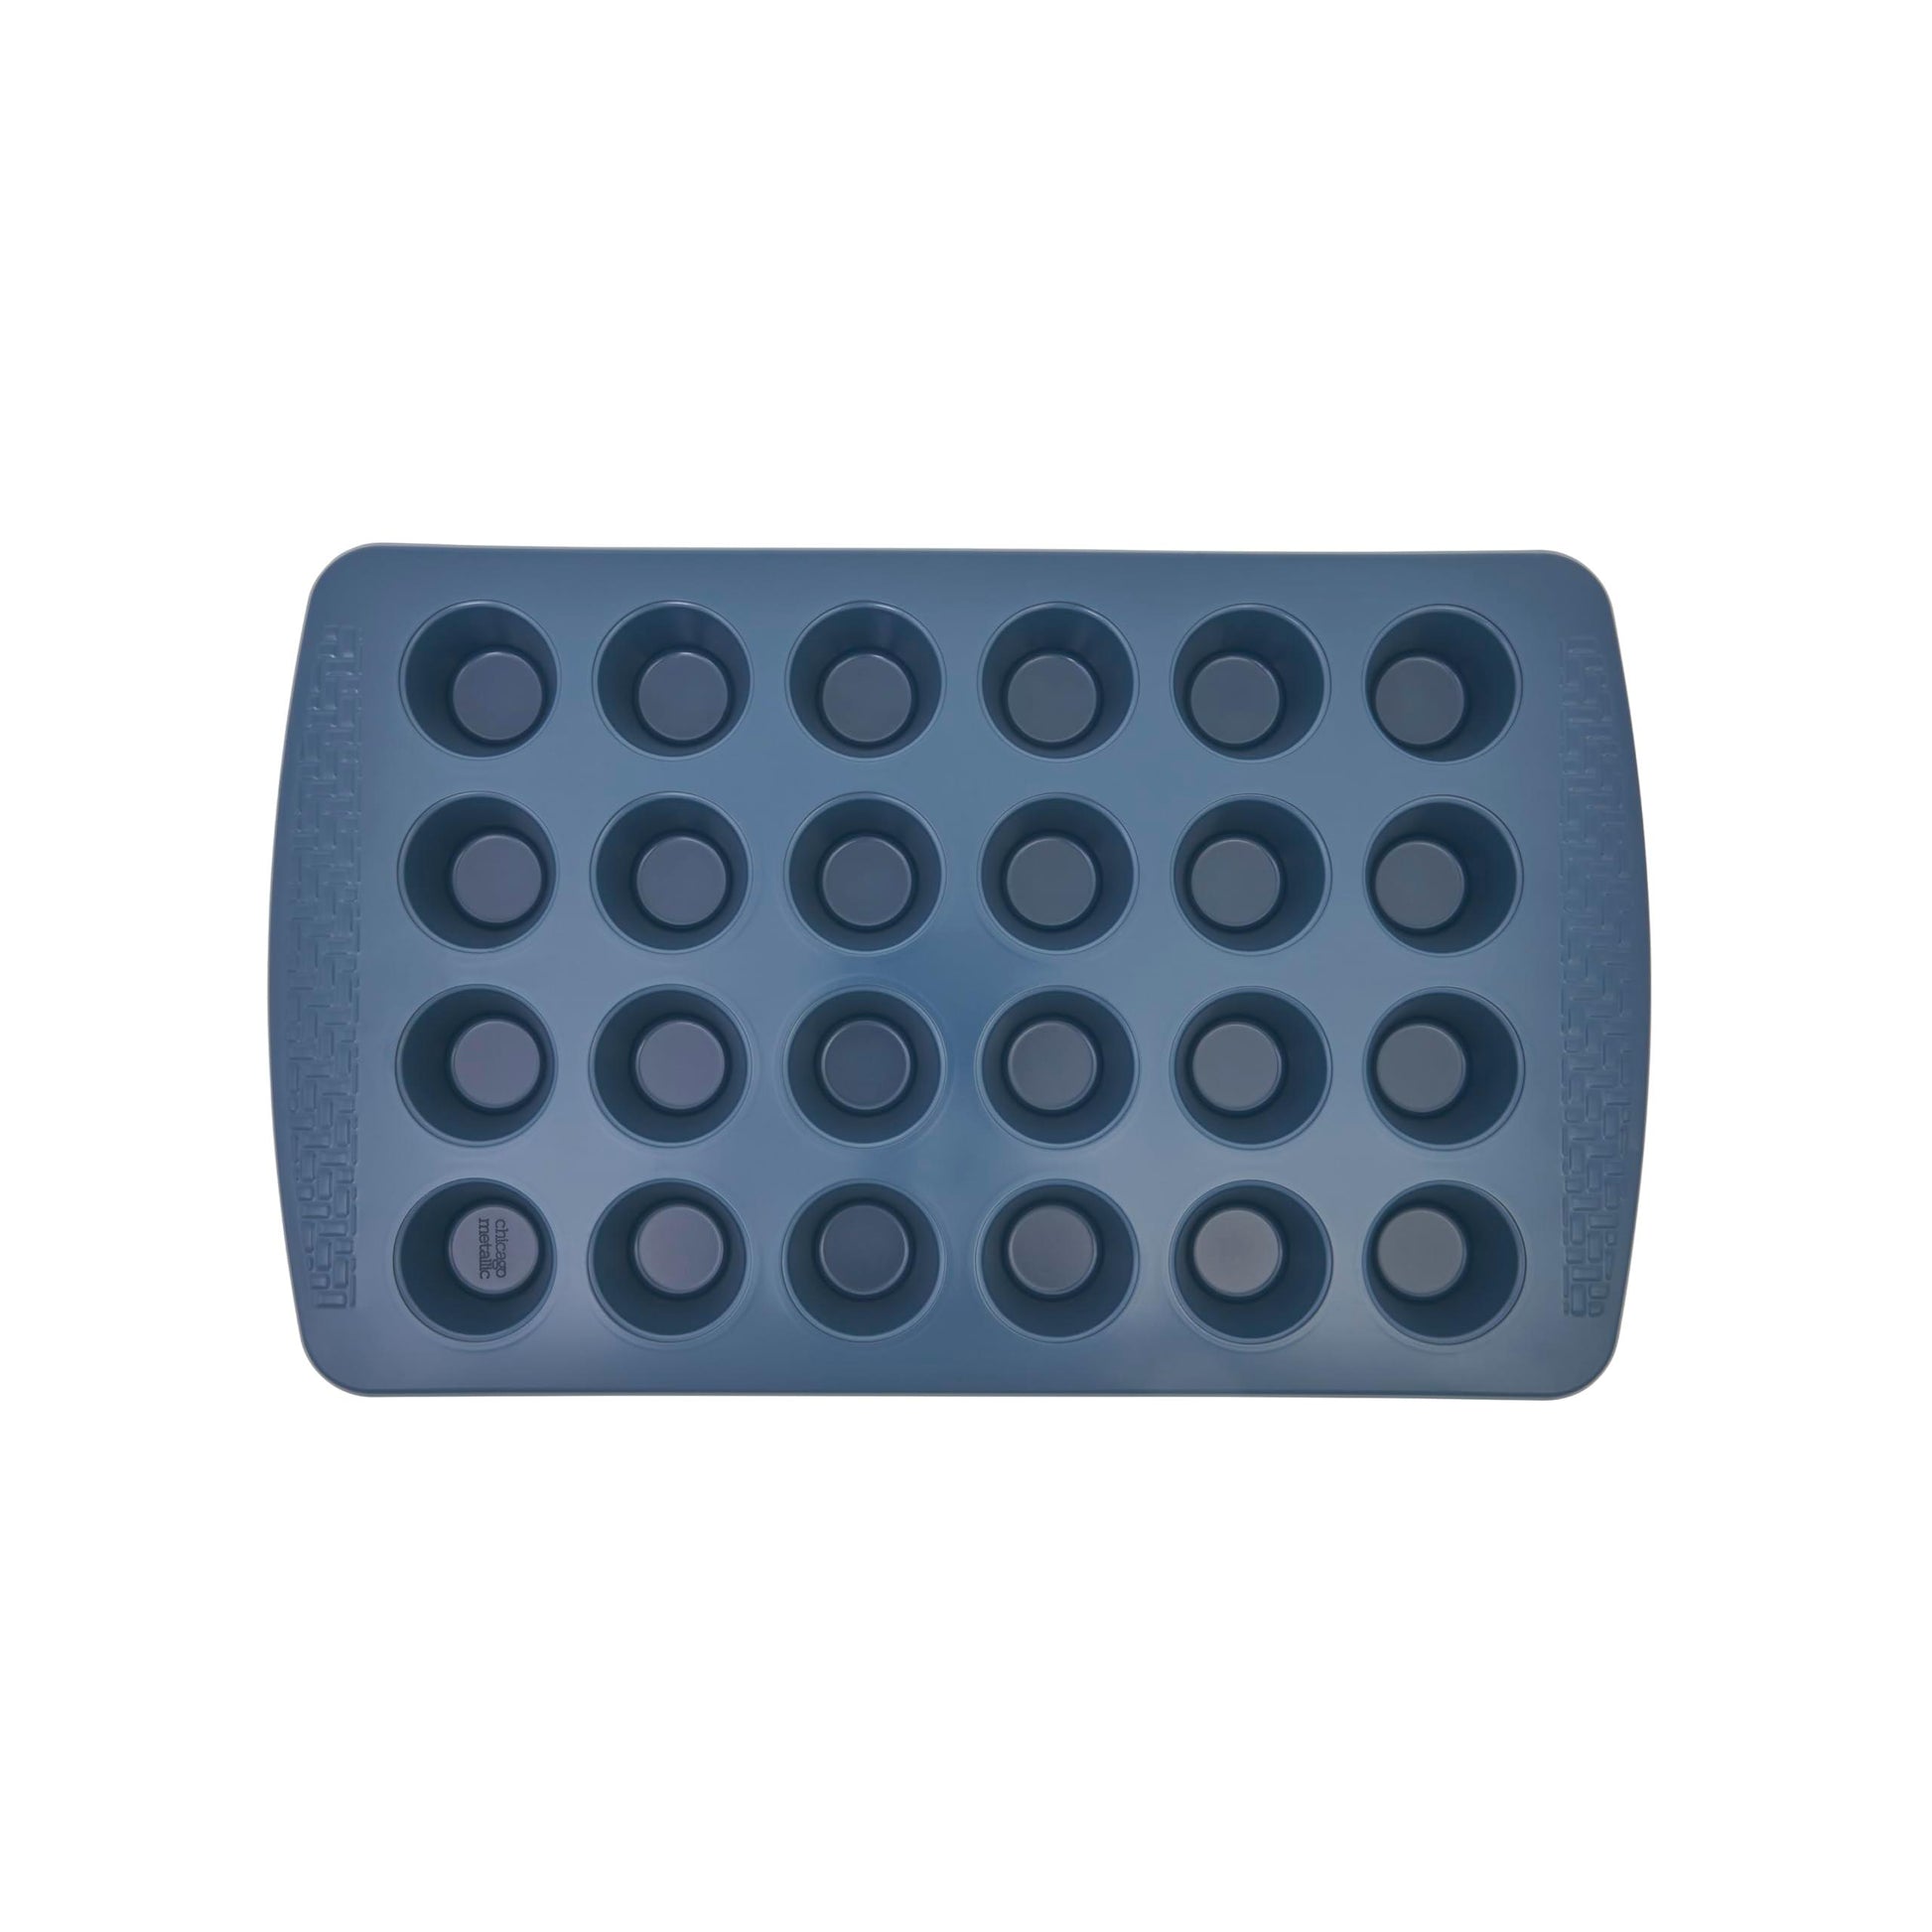 Chicago Metallic Everyday Non-Stick Muffin Pan, Perfect for muffins, eggbites and more! 24-Cup, Blue - CookCave